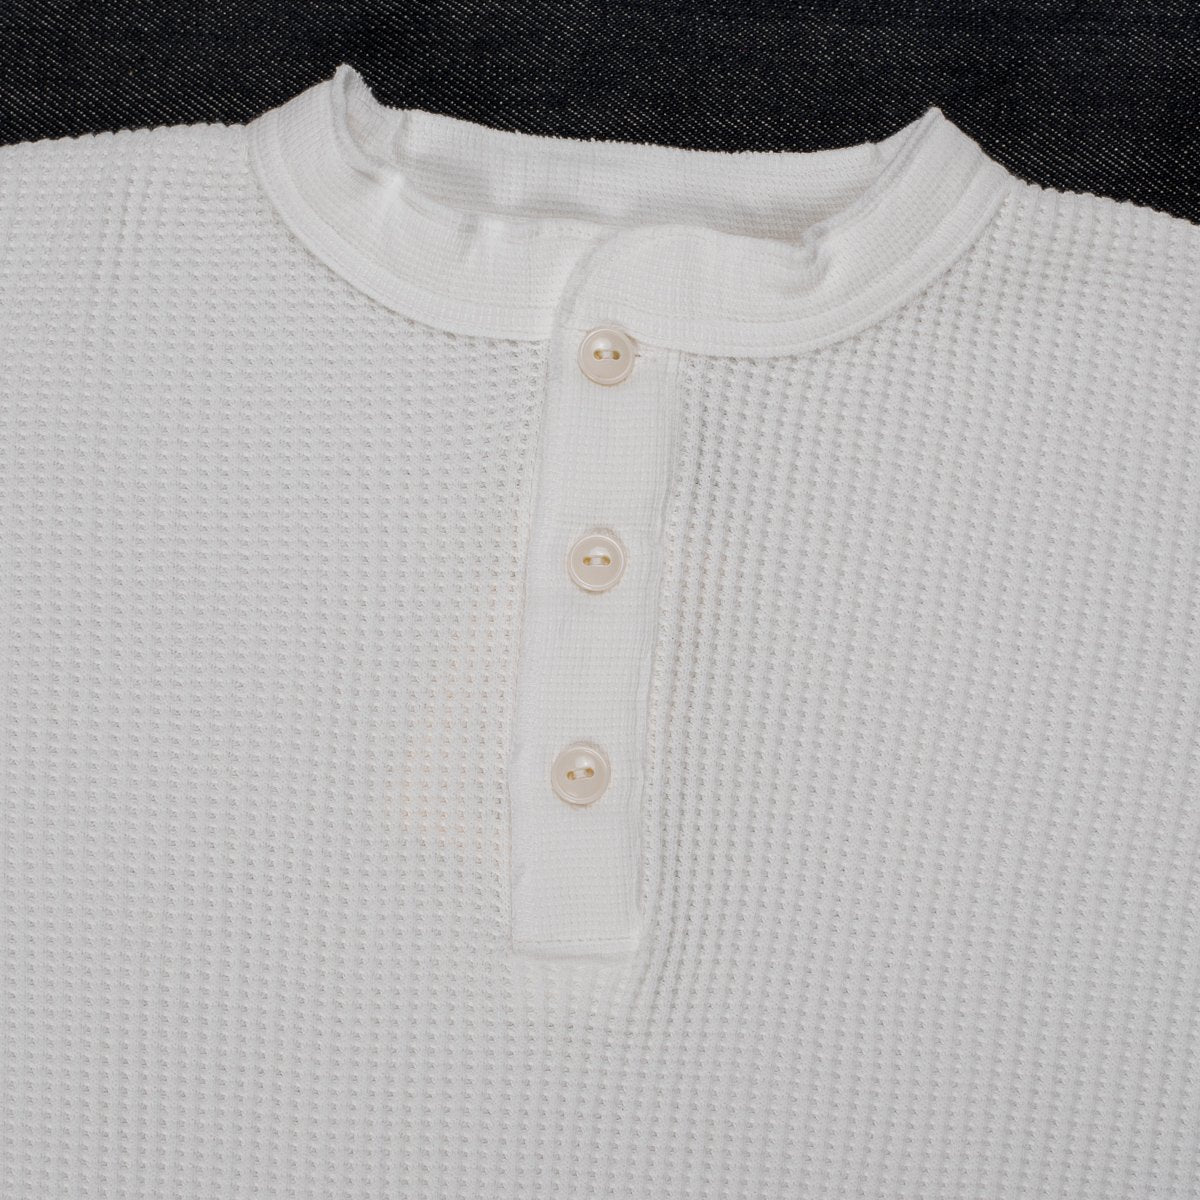 IronHeart Waffle Knit Long Sleeved Thermal Henley - White